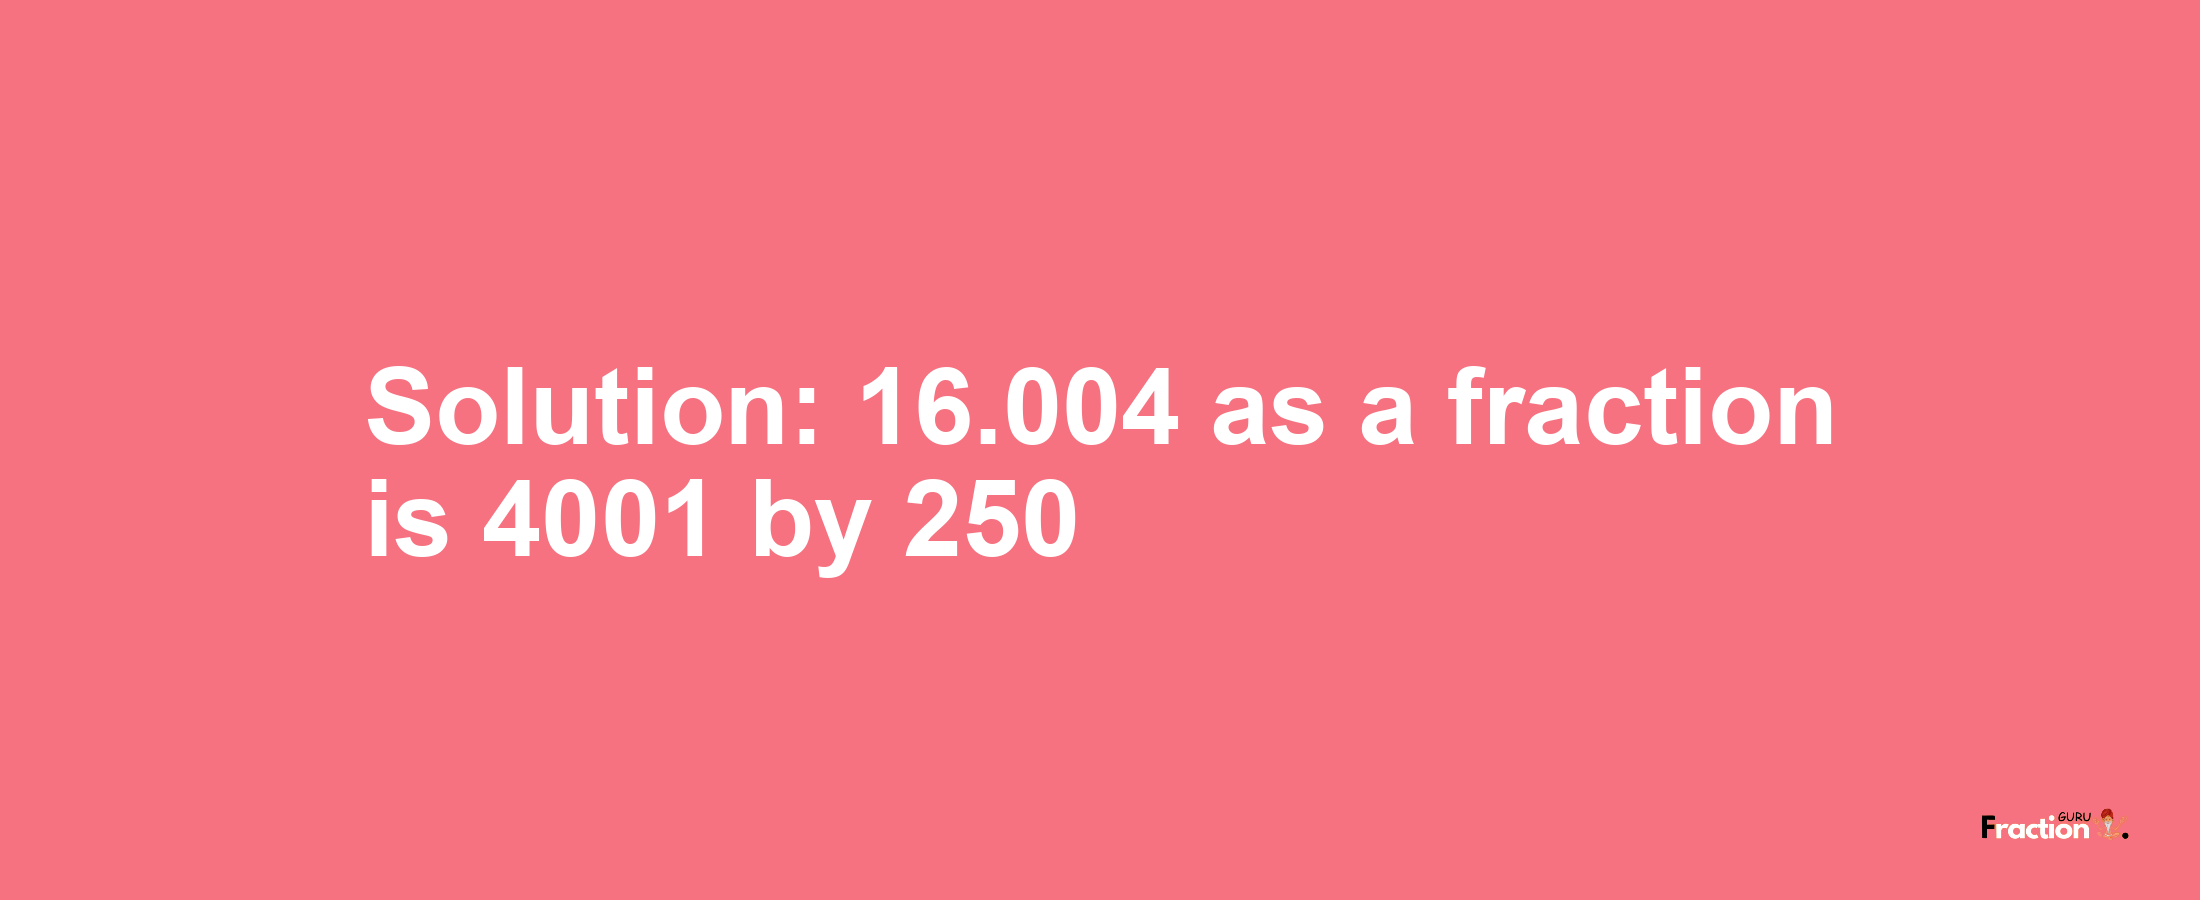 Solution:16.004 as a fraction is 4001/250